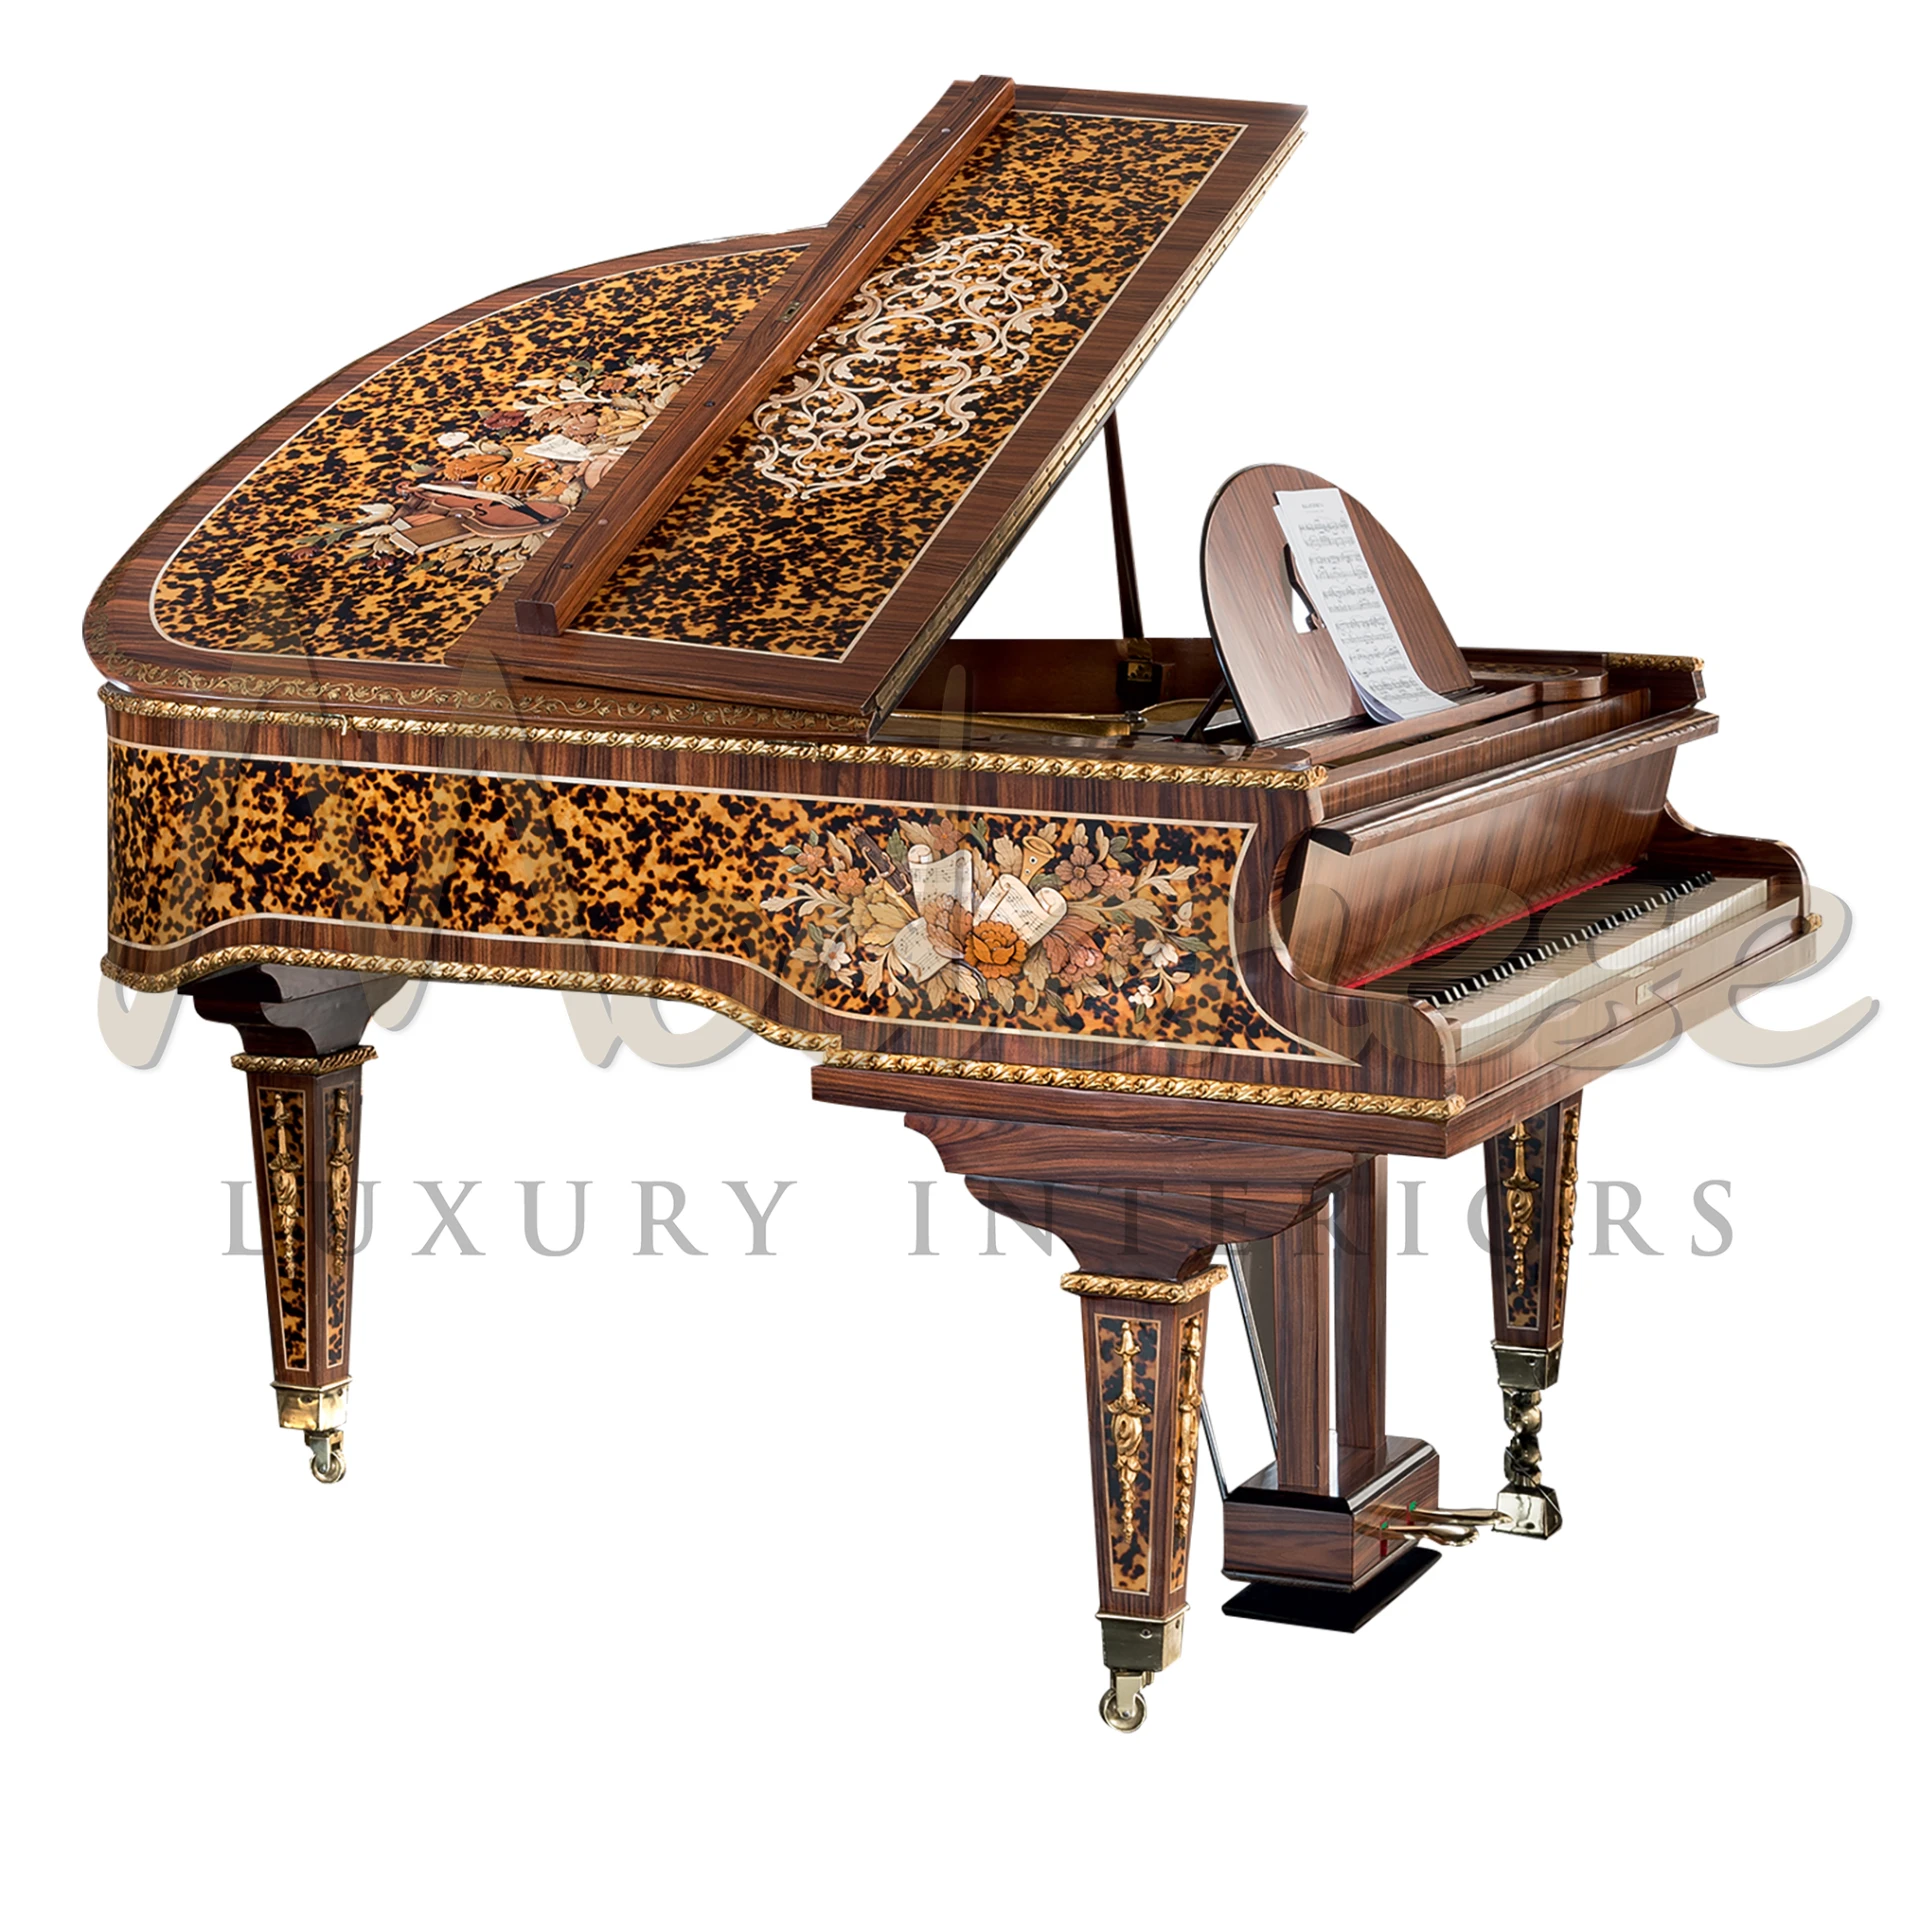 Marquetry Solid Wood Grand Piano by Modenese, showcasing intricate veneer patterns for luxury classic interior design.